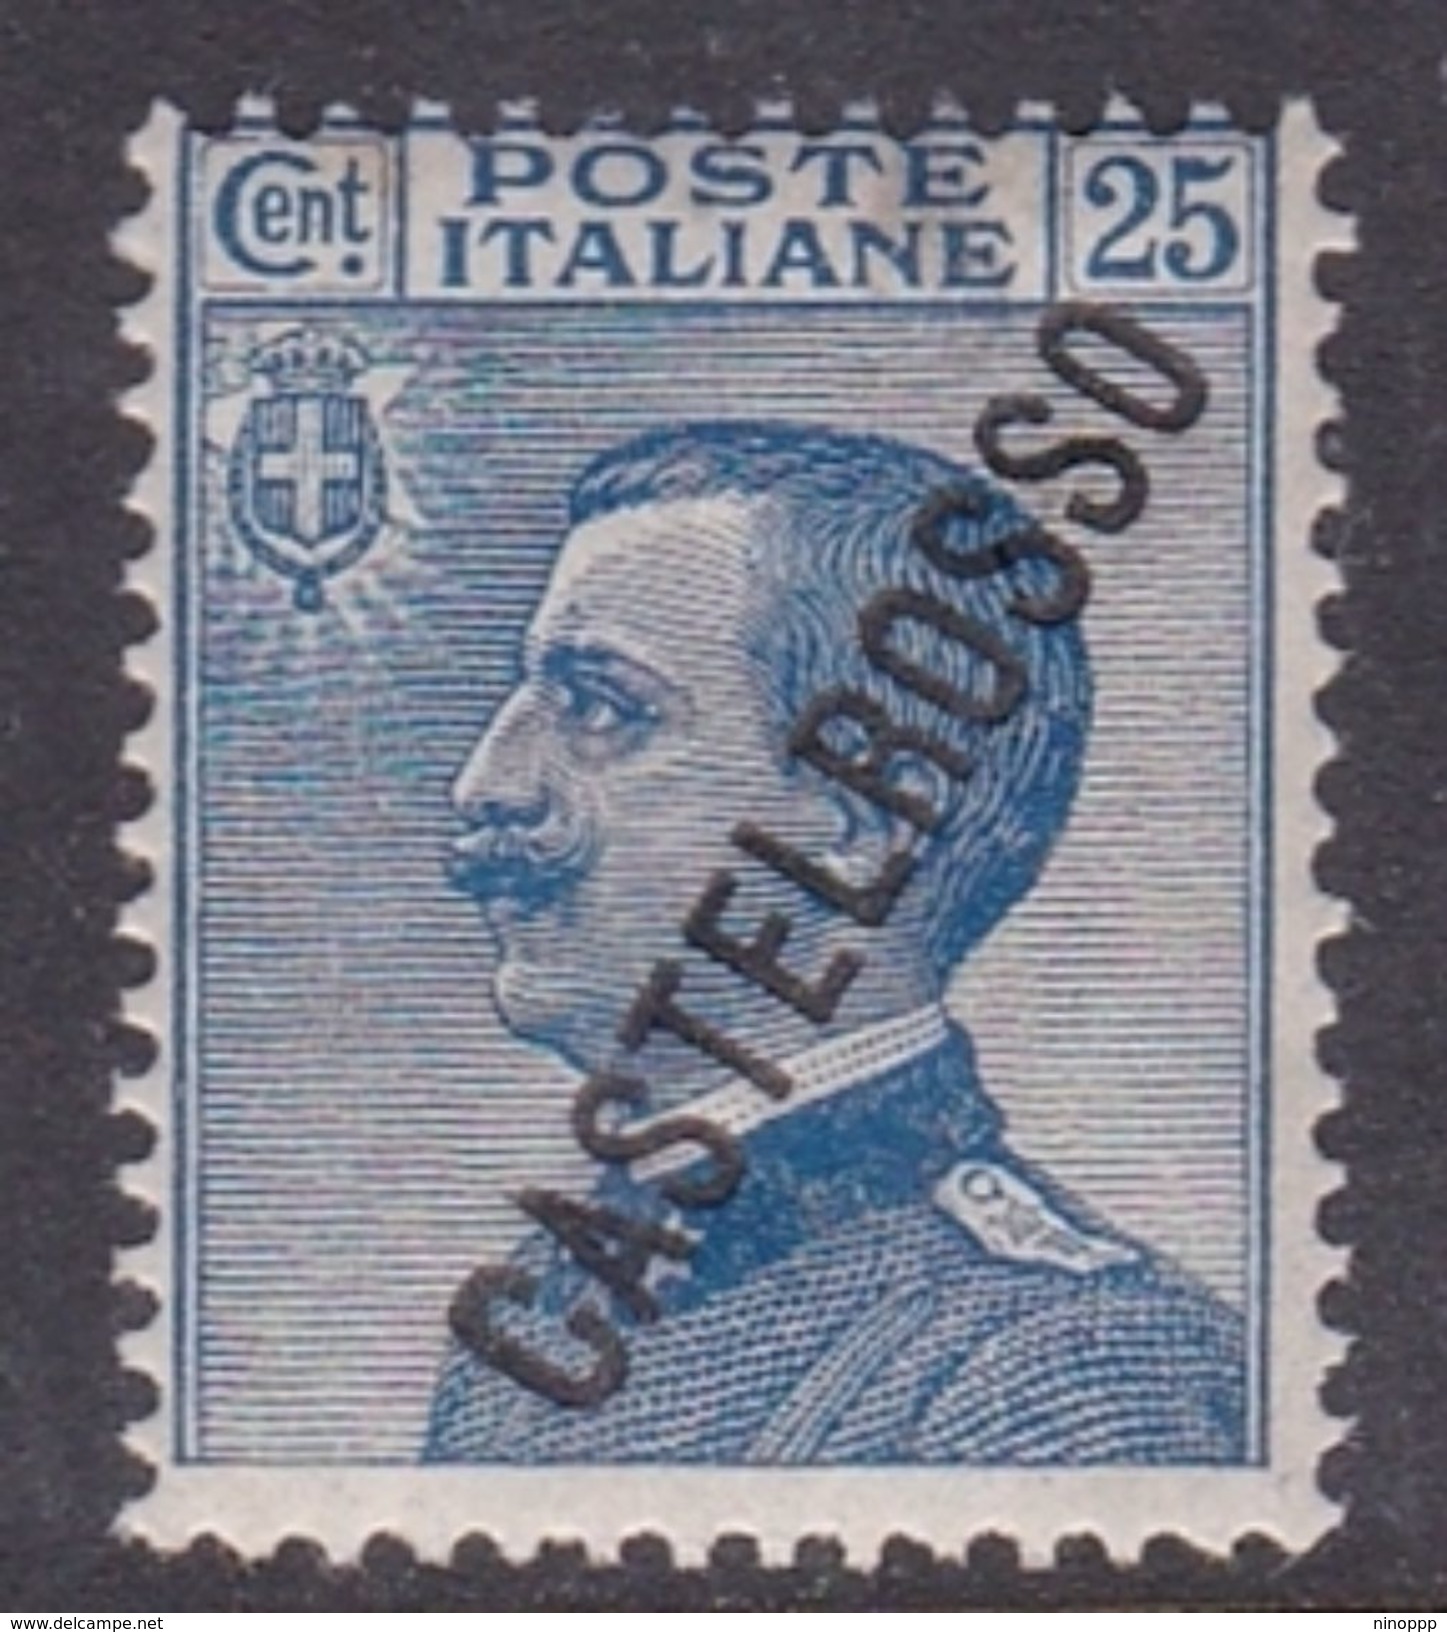 Italy-Colonies And Territories-Castelrosso S19 1924 25c Blue MNH - General Issues